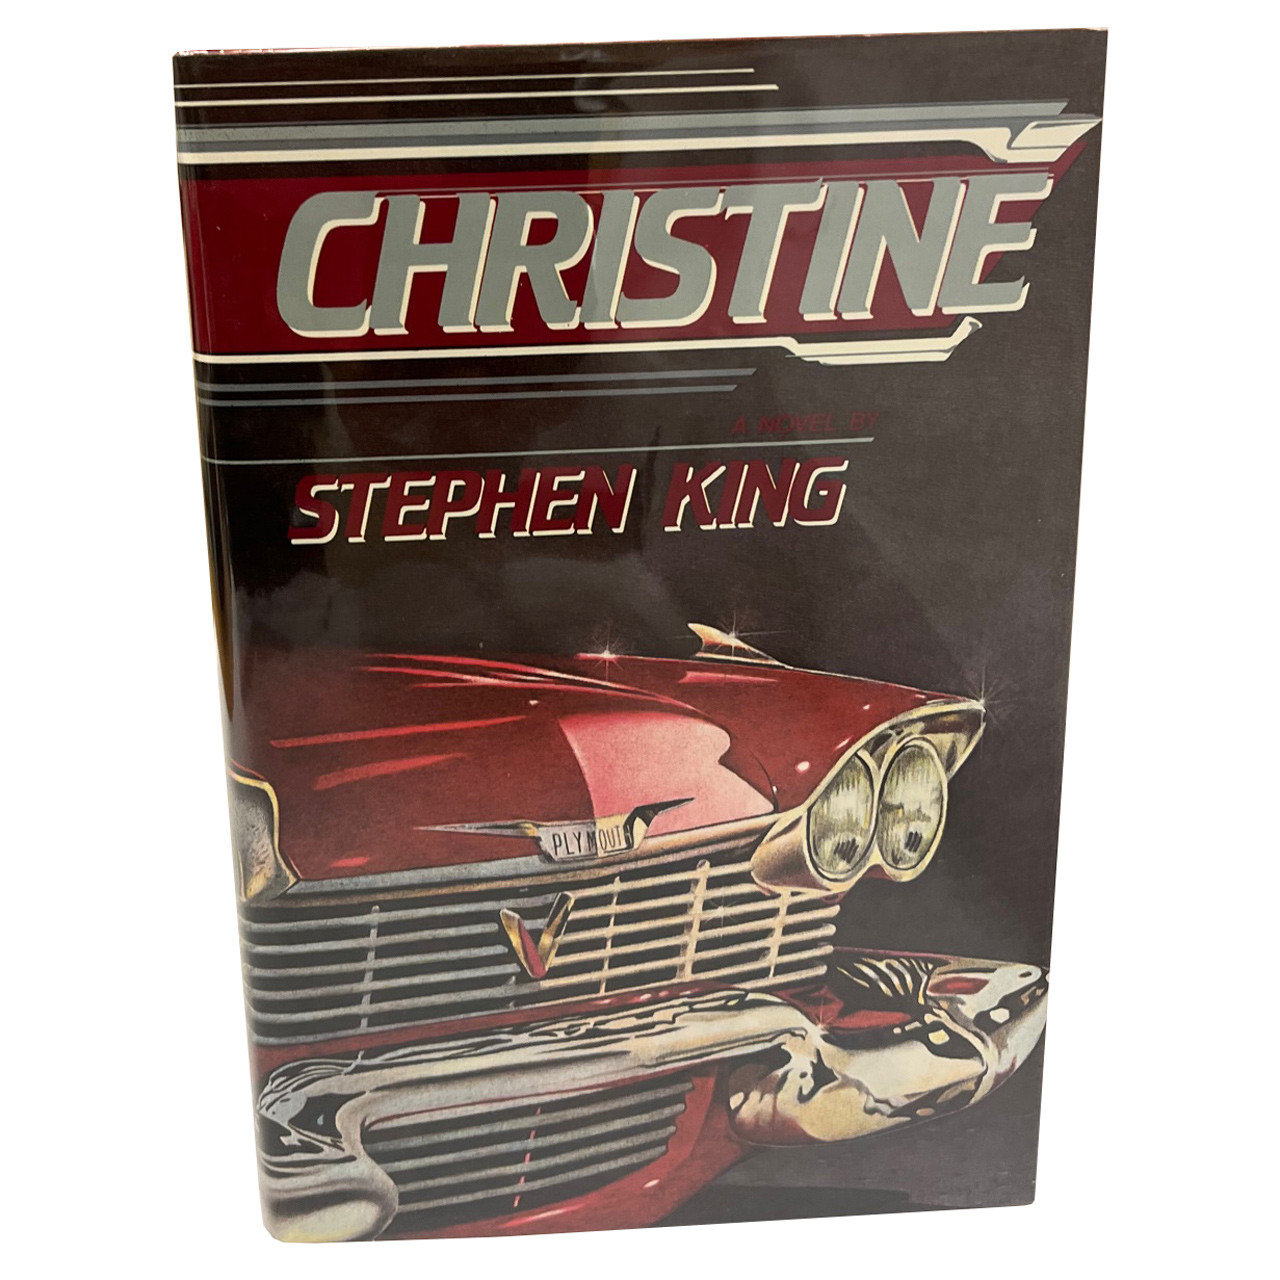 Stephen King "Christine" Slipcased Signed Limited Deluxe First Edition No. 830 of 1,000